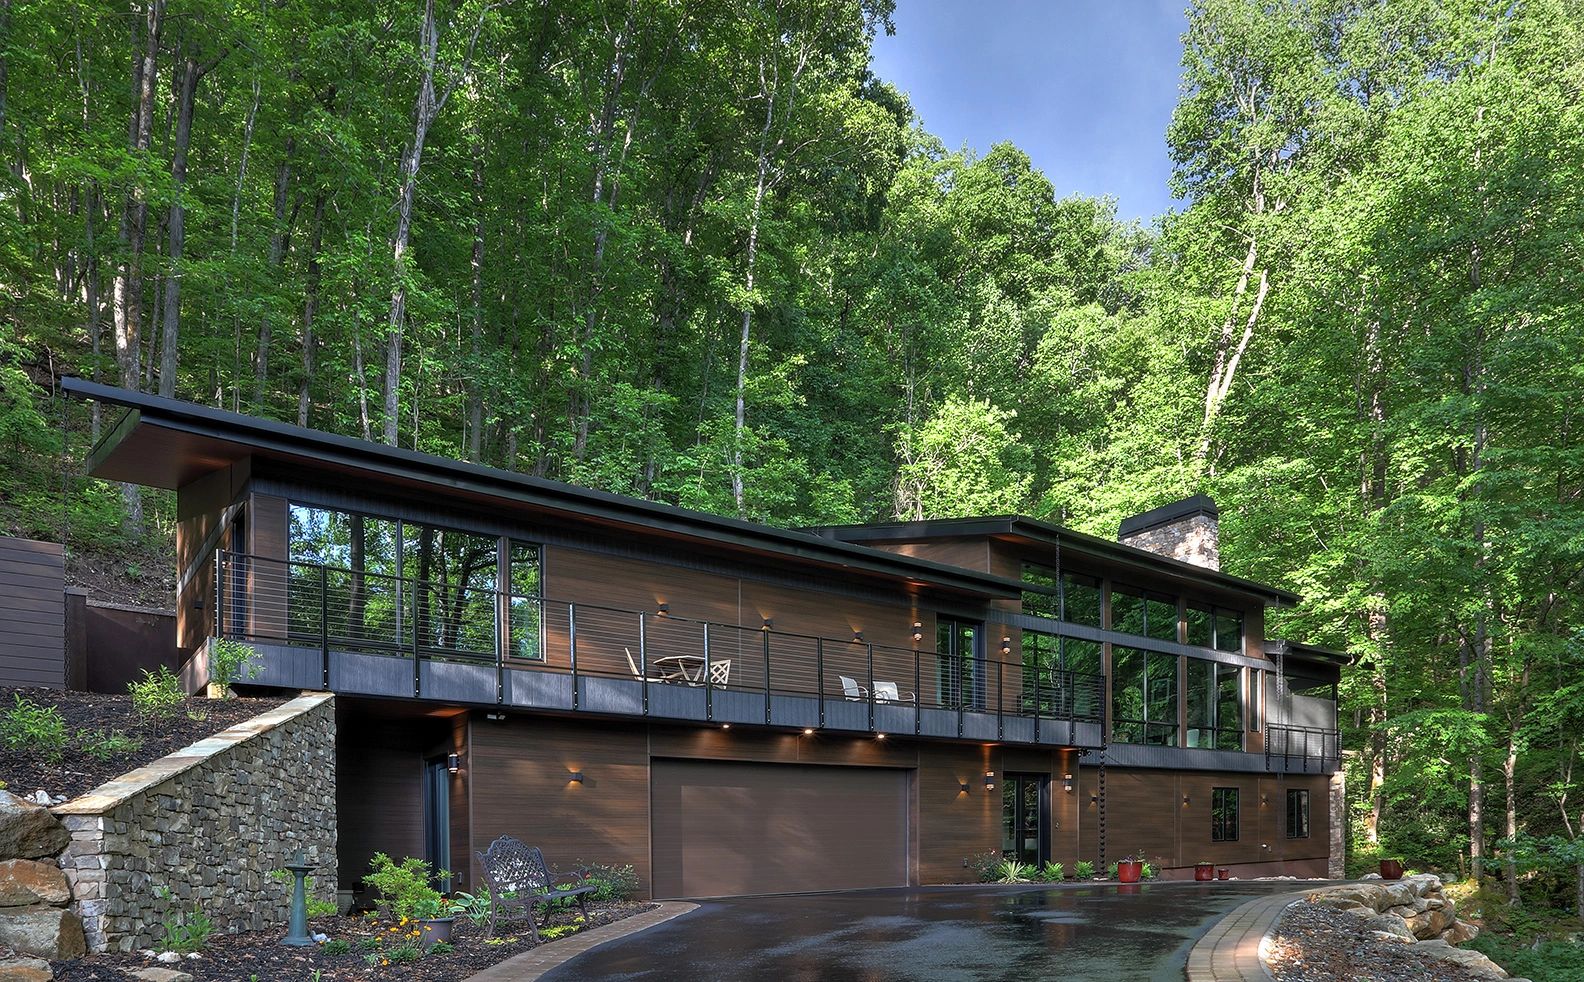 Residential Architecture in Greenville - Architecture 224